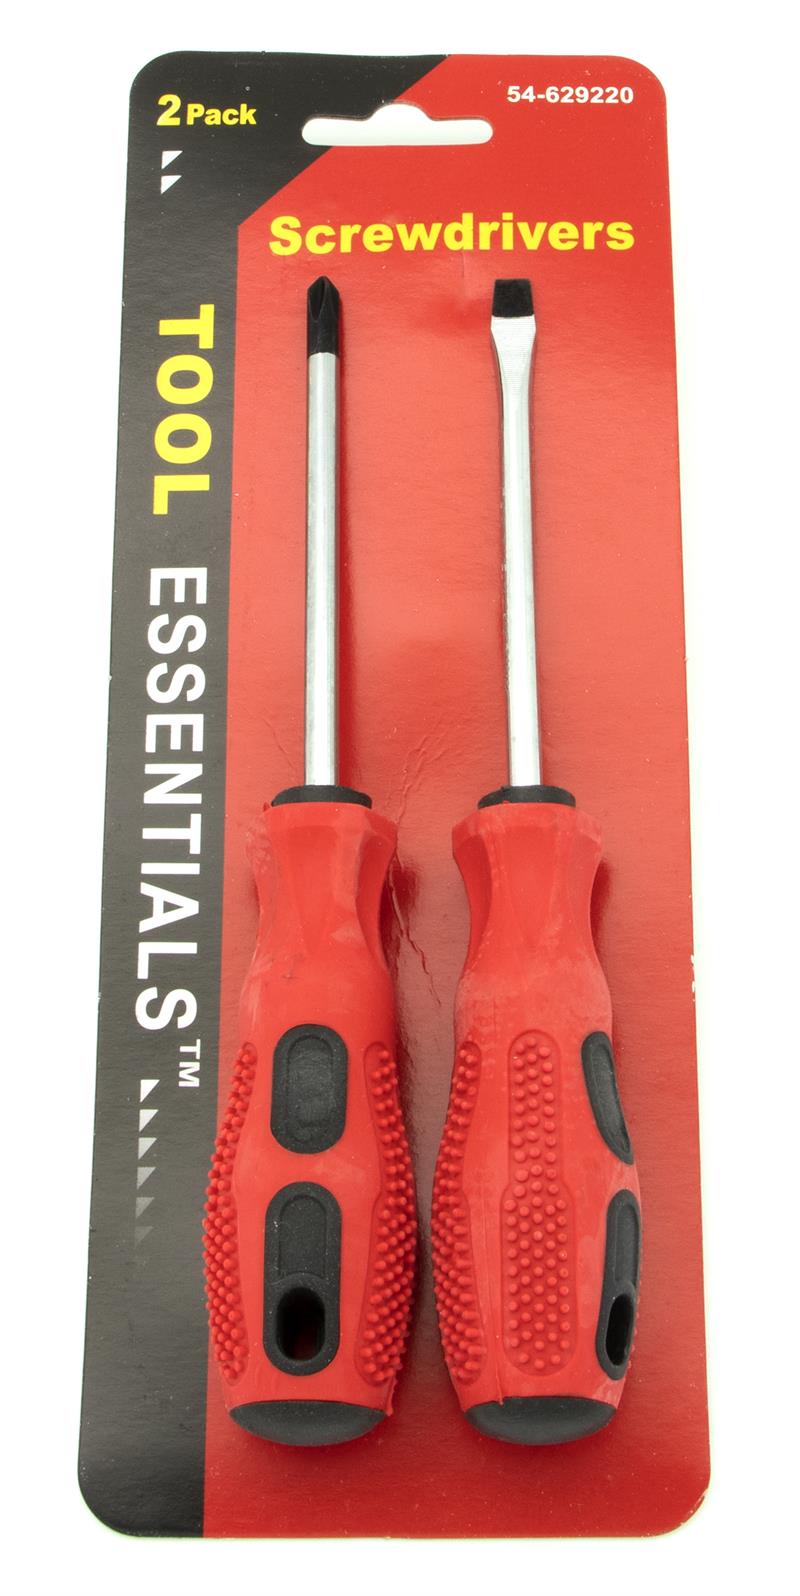 2-Piece 4 SCREWDRIVER Set (#2 Phillips & 1/4 Slotted)